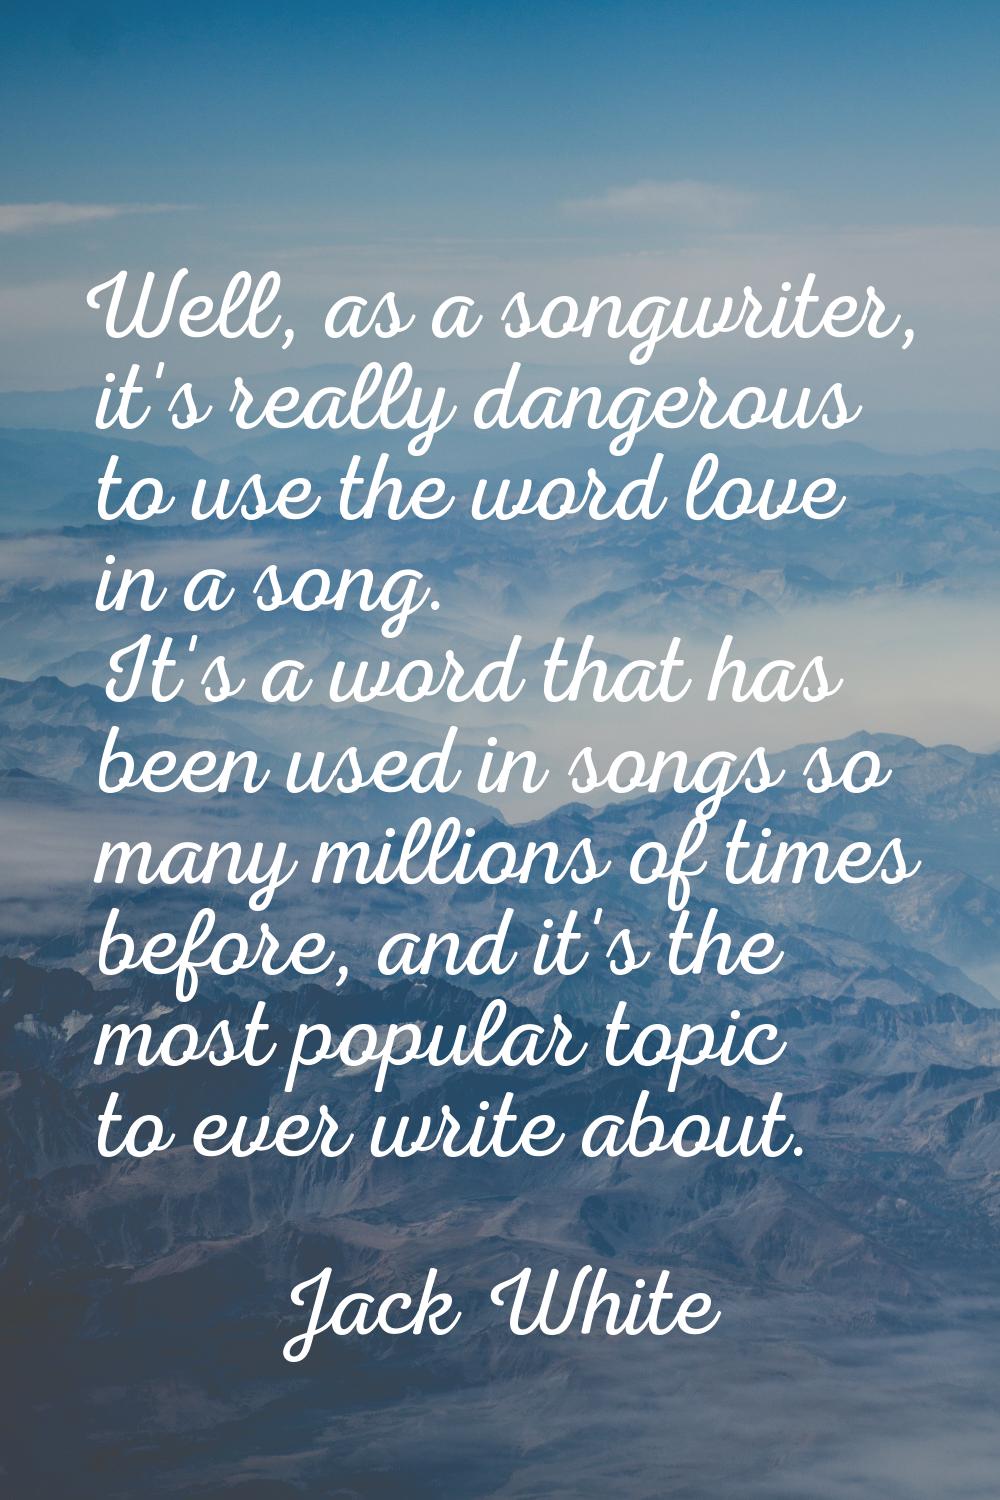 Well, as a songwriter, it's really dangerous to use the word love in a song. It's a word that has b